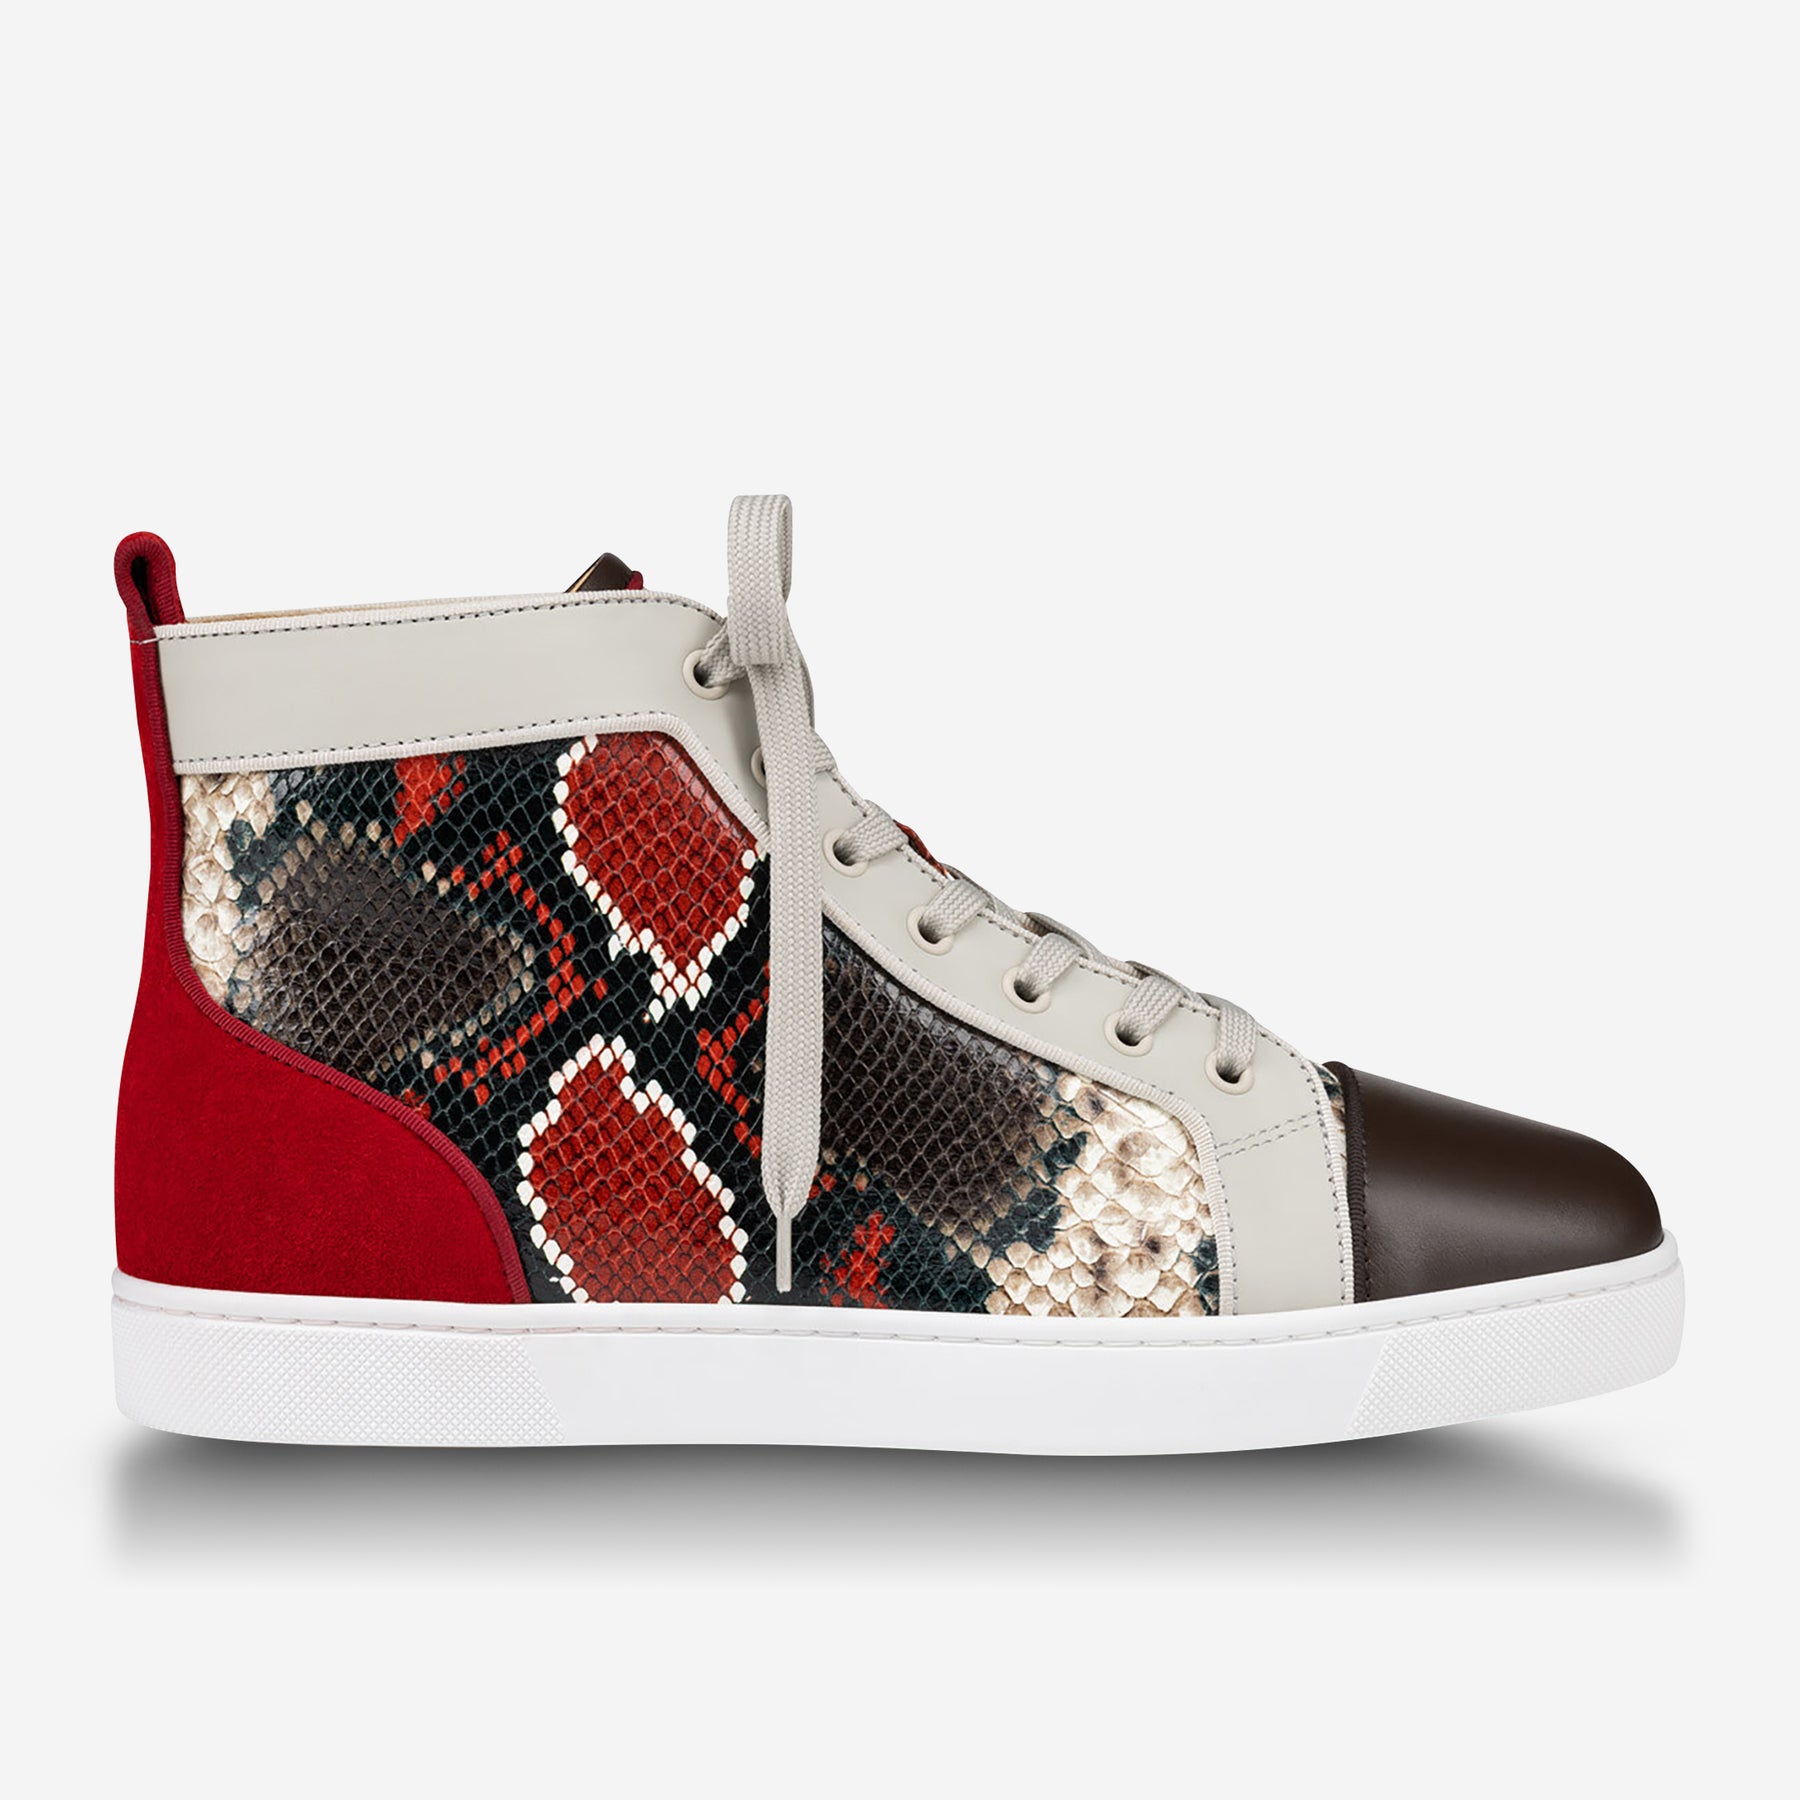 Sneaker of the Week: Christian Louboutin Studded Sneakers